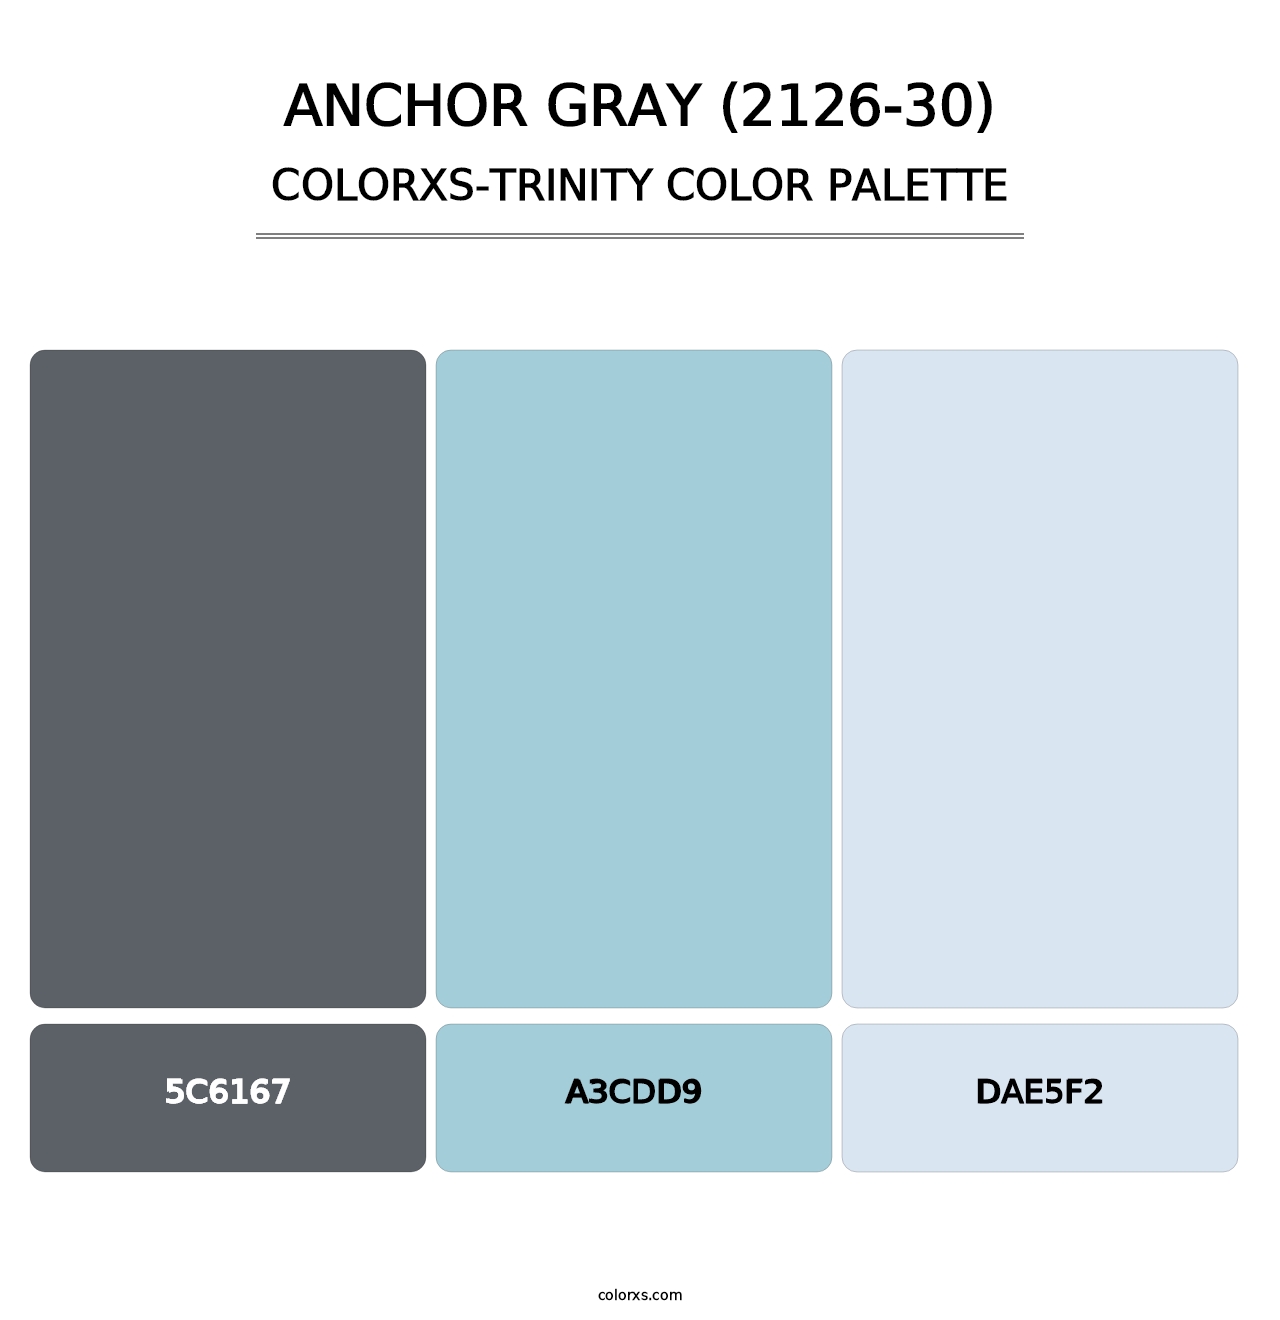 Anchor Gray (2126-30) - Colorxs Trinity Palette